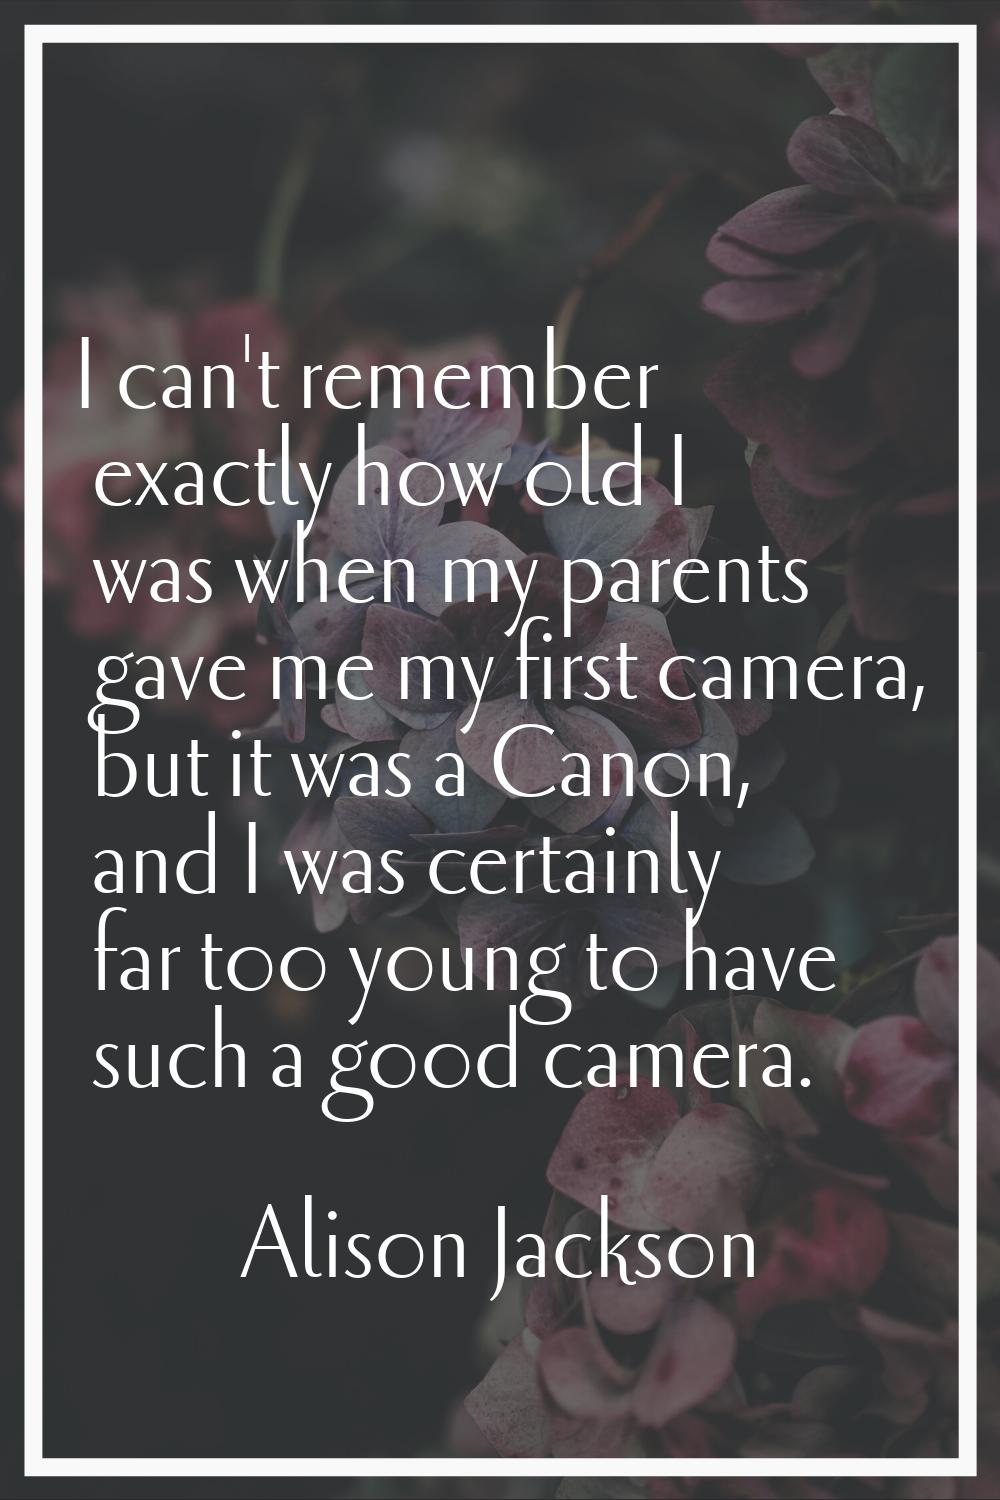 I can't remember exactly how old I was when my parents gave me my first camera, but it was a Canon,